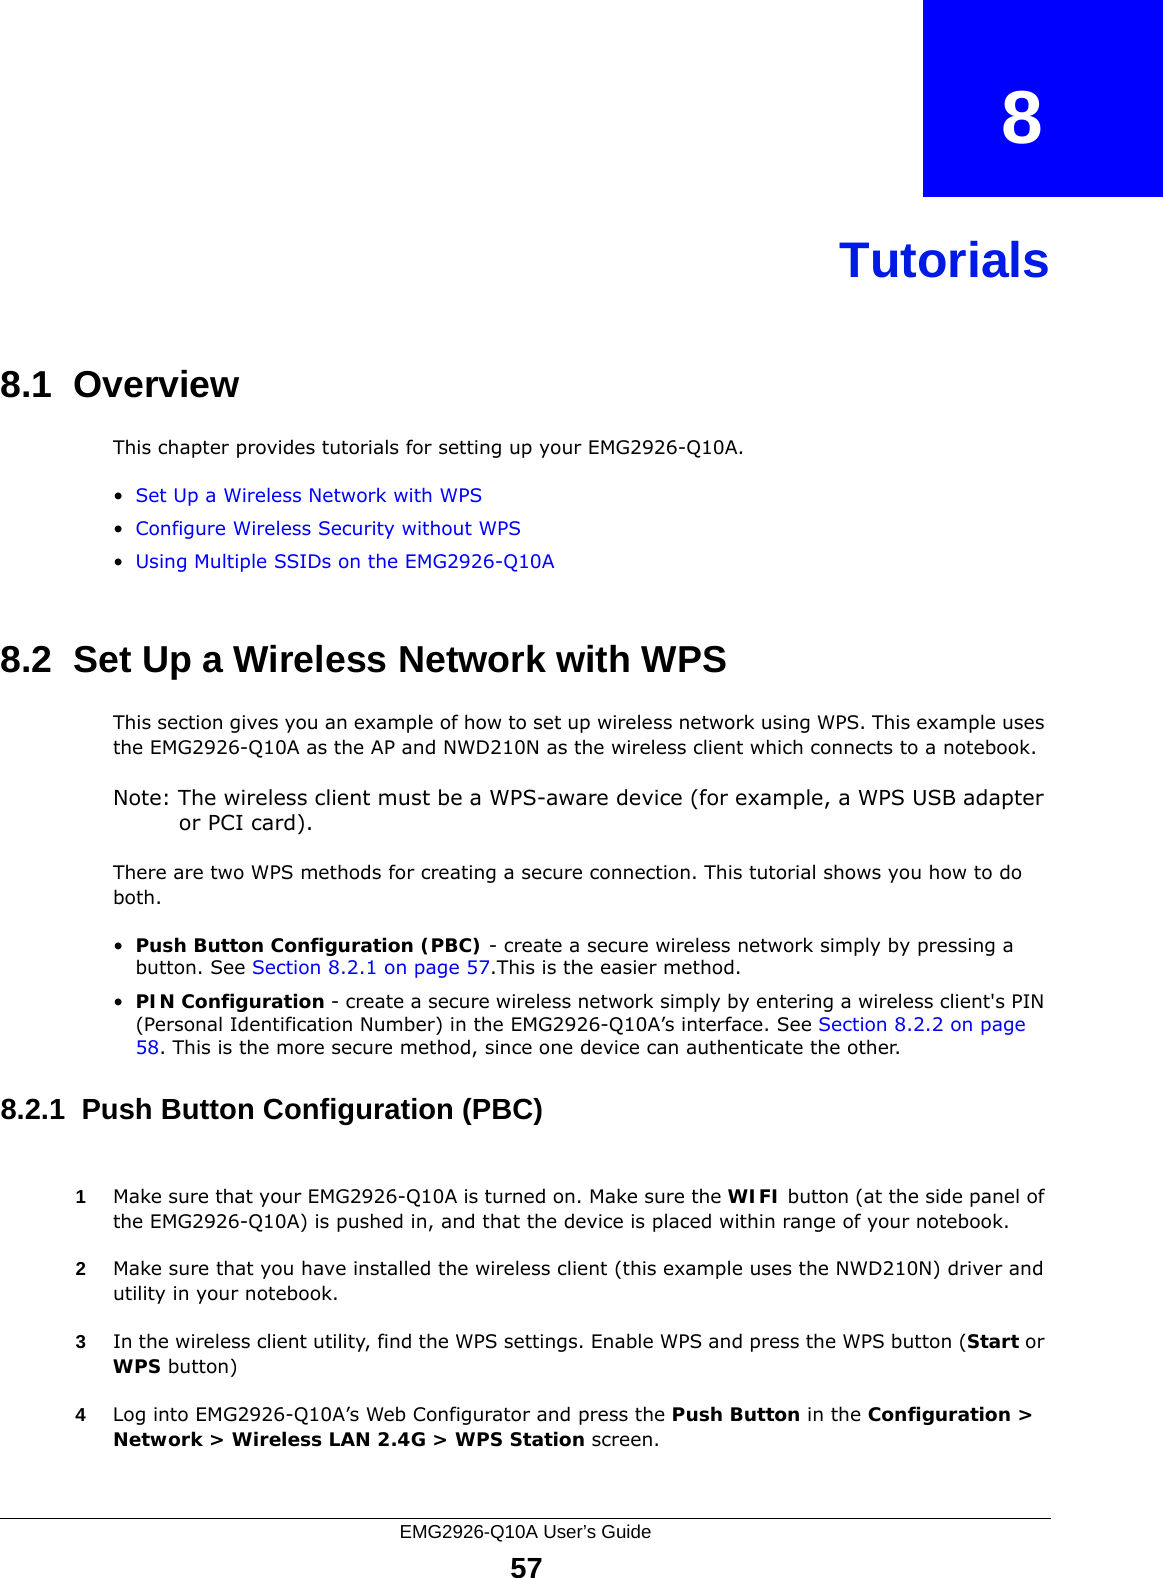 EMG2926-Q10A User’s Guide57CHAPTER   8Tutorials8.1  OverviewThis chapter provides tutorials for setting up your EMG2926-Q10A.•Set Up a Wireless Network with WPS•Configure Wireless Security without WPS•Using Multiple SSIDs on the EMG2926-Q10A8.2  Set Up a Wireless Network with WPSThis section gives you an example of how to set up wireless network using WPS. This example uses the EMG2926-Q10A as the AP and NWD210N as the wireless client which connects to a notebook. Note: The wireless client must be a WPS-aware device (for example, a WPS USB adapter or PCI card).There are two WPS methods for creating a secure connection. This tutorial shows you how to do both.•Push Button Configuration (PBC) - create a secure wireless network simply by pressing a button. See Section 8.2.1 on page 57.This is the easier method.•PIN Configuration - create a secure wireless network simply by entering a wireless client&apos;s PIN (Personal Identification Number) in the EMG2926-Q10A’s interface. See Section 8.2.2 on page 58. This is the more secure method, since one device can authenticate the other.8.2.1  Push Button Configuration (PBC)1Make sure that your EMG2926-Q10A is turned on. Make sure the WIFI button (at the side panel of the EMG2926-Q10A) is pushed in, and that the device is placed within range of your notebook. 2Make sure that you have installed the wireless client (this example uses the NWD210N) driver and utility in your notebook.3In the wireless client utility, find the WPS settings. Enable WPS and press the WPS button (Start or WPS button)4Log into EMG2926-Q10A’s Web Configurator and press the Push Button in the Configuration &gt; Network &gt; Wireless LAN 2.4G &gt; WPS Station screen. 